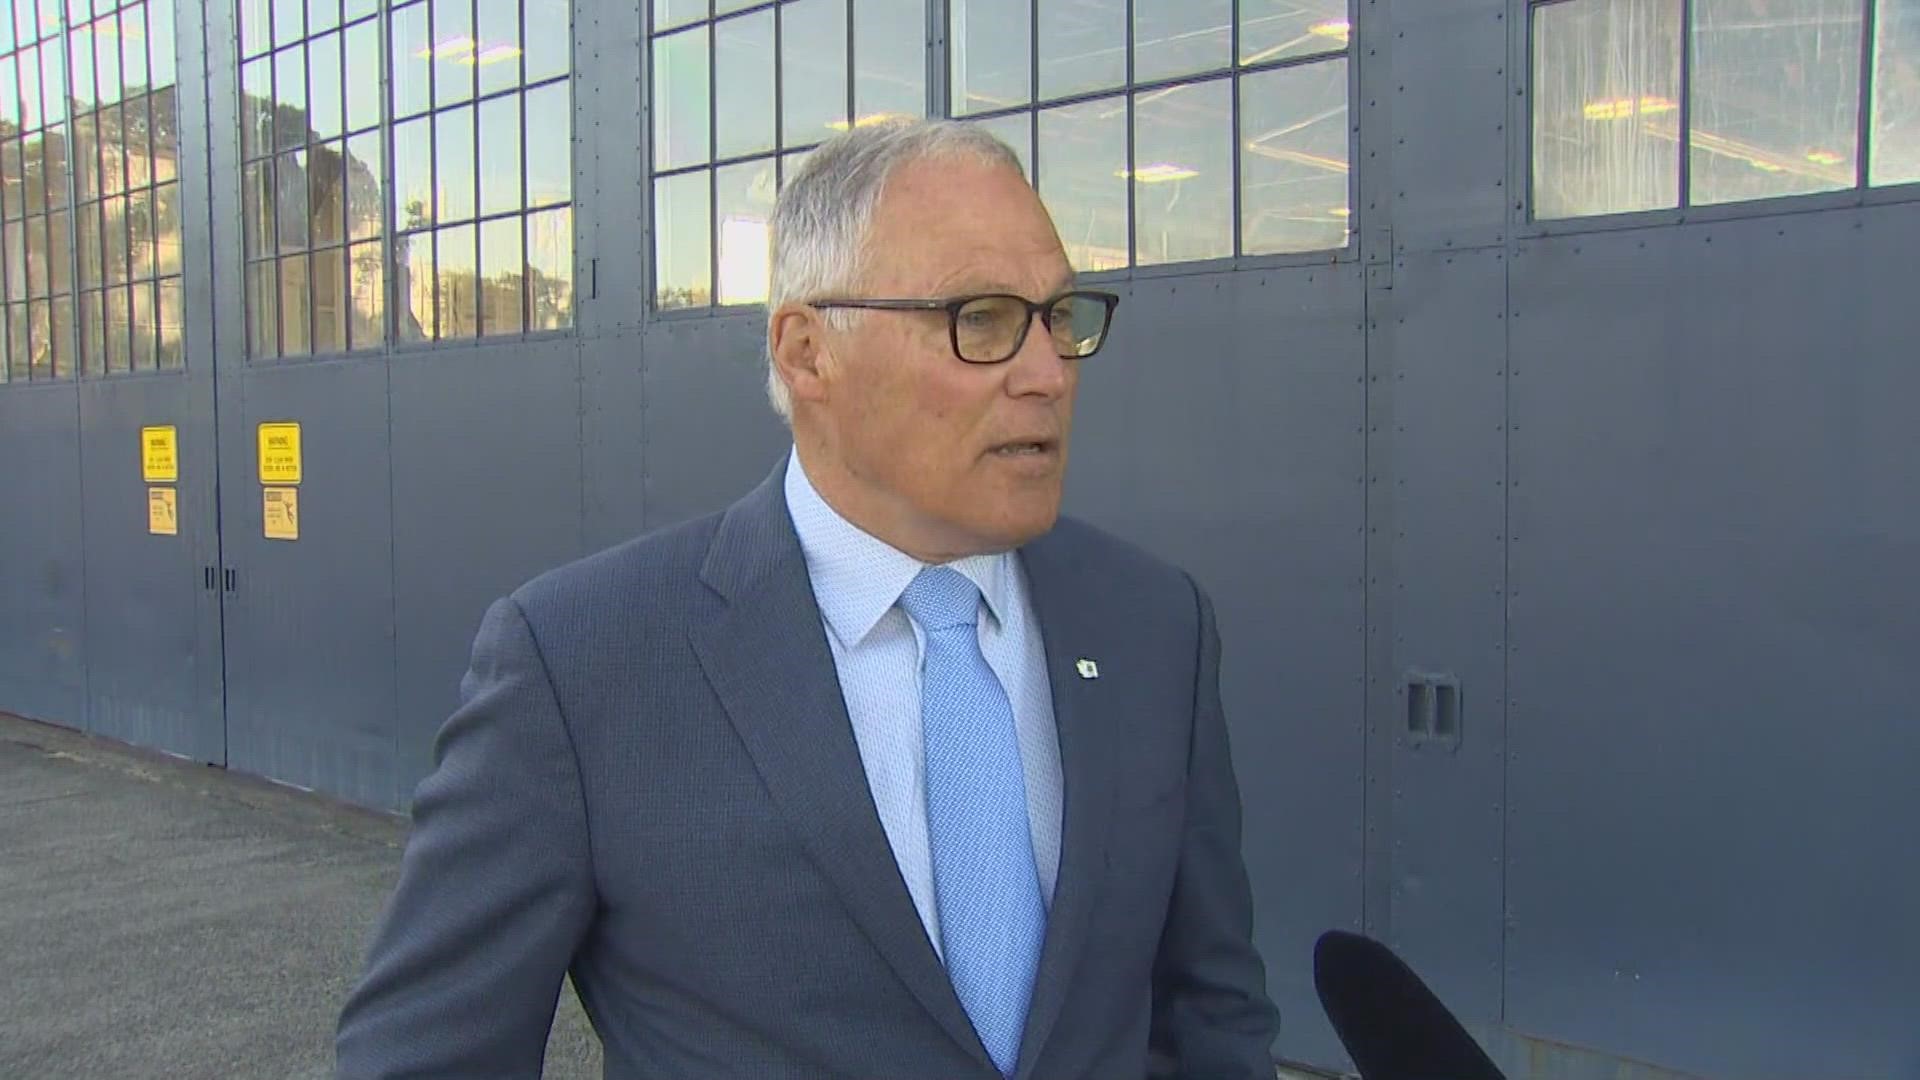 Washington governor Jay Inslee vows to always protect a woman's right to choose in the state and to make abortion services available to women from neighboring states